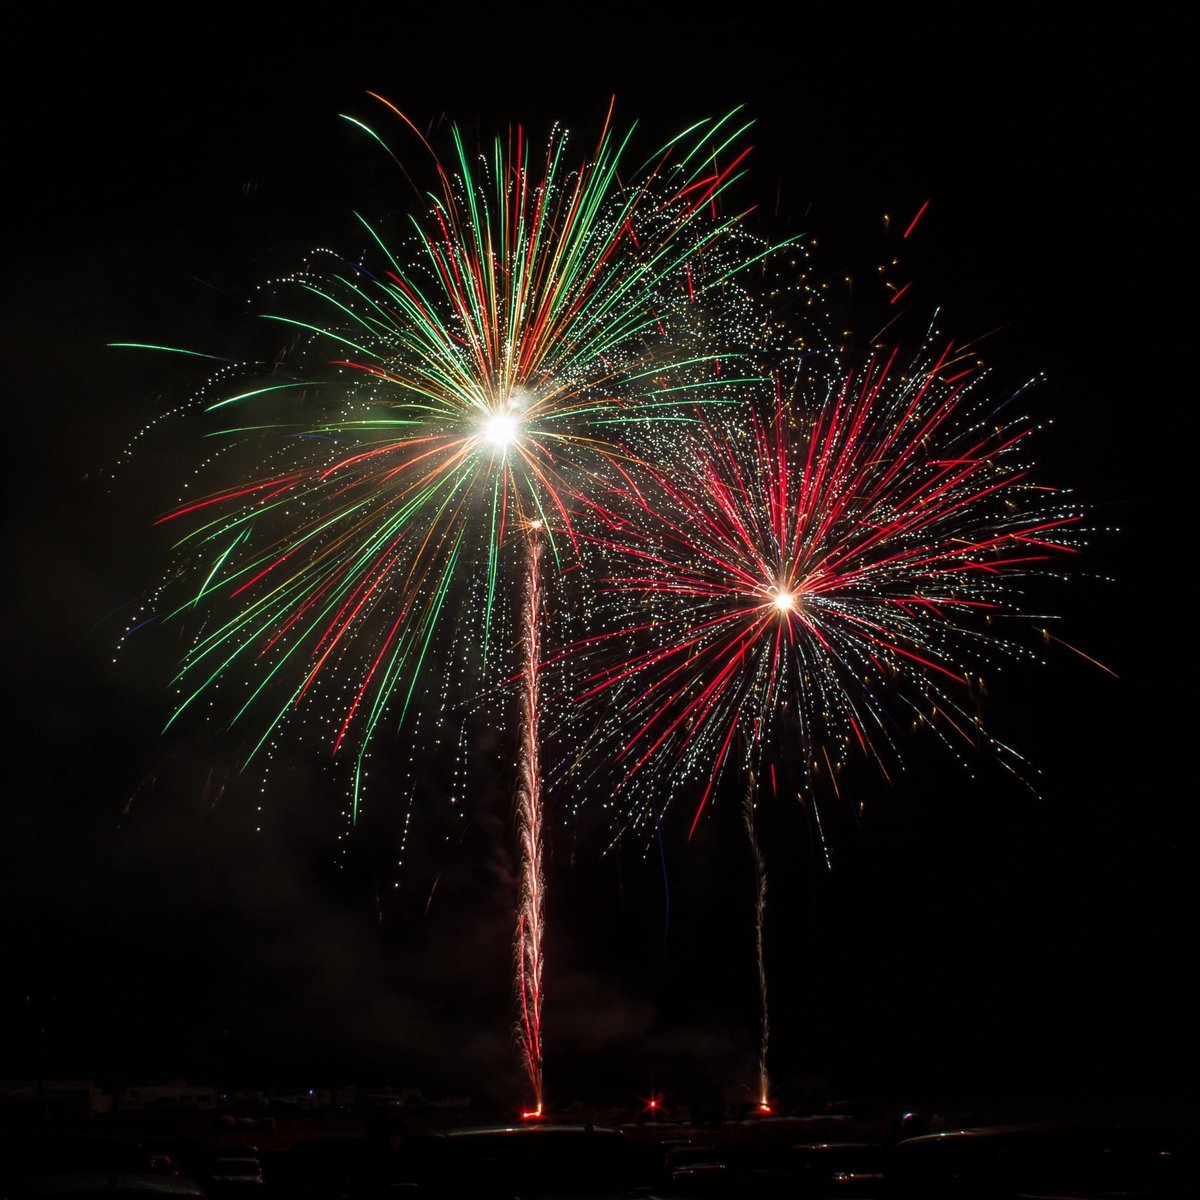 Happy Fourth of July! #4thofJuly #itsamazingoutthere #fireworks #Selinsgrove